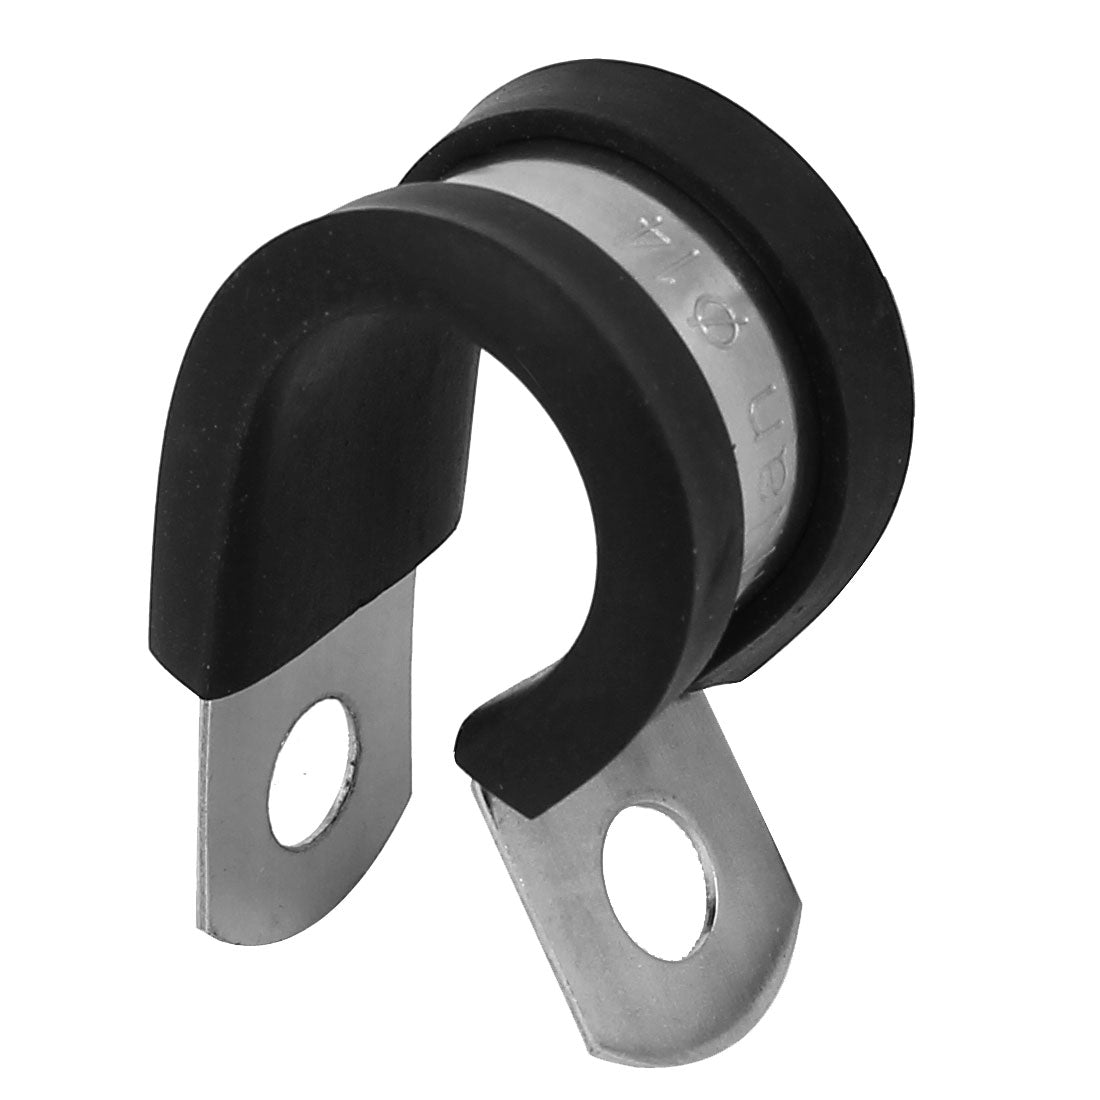 uxcell Uxcell 14mm Dia EPDM Rubber Lined P Clips Cable Hose Pipe Clamps Holder 2pcs